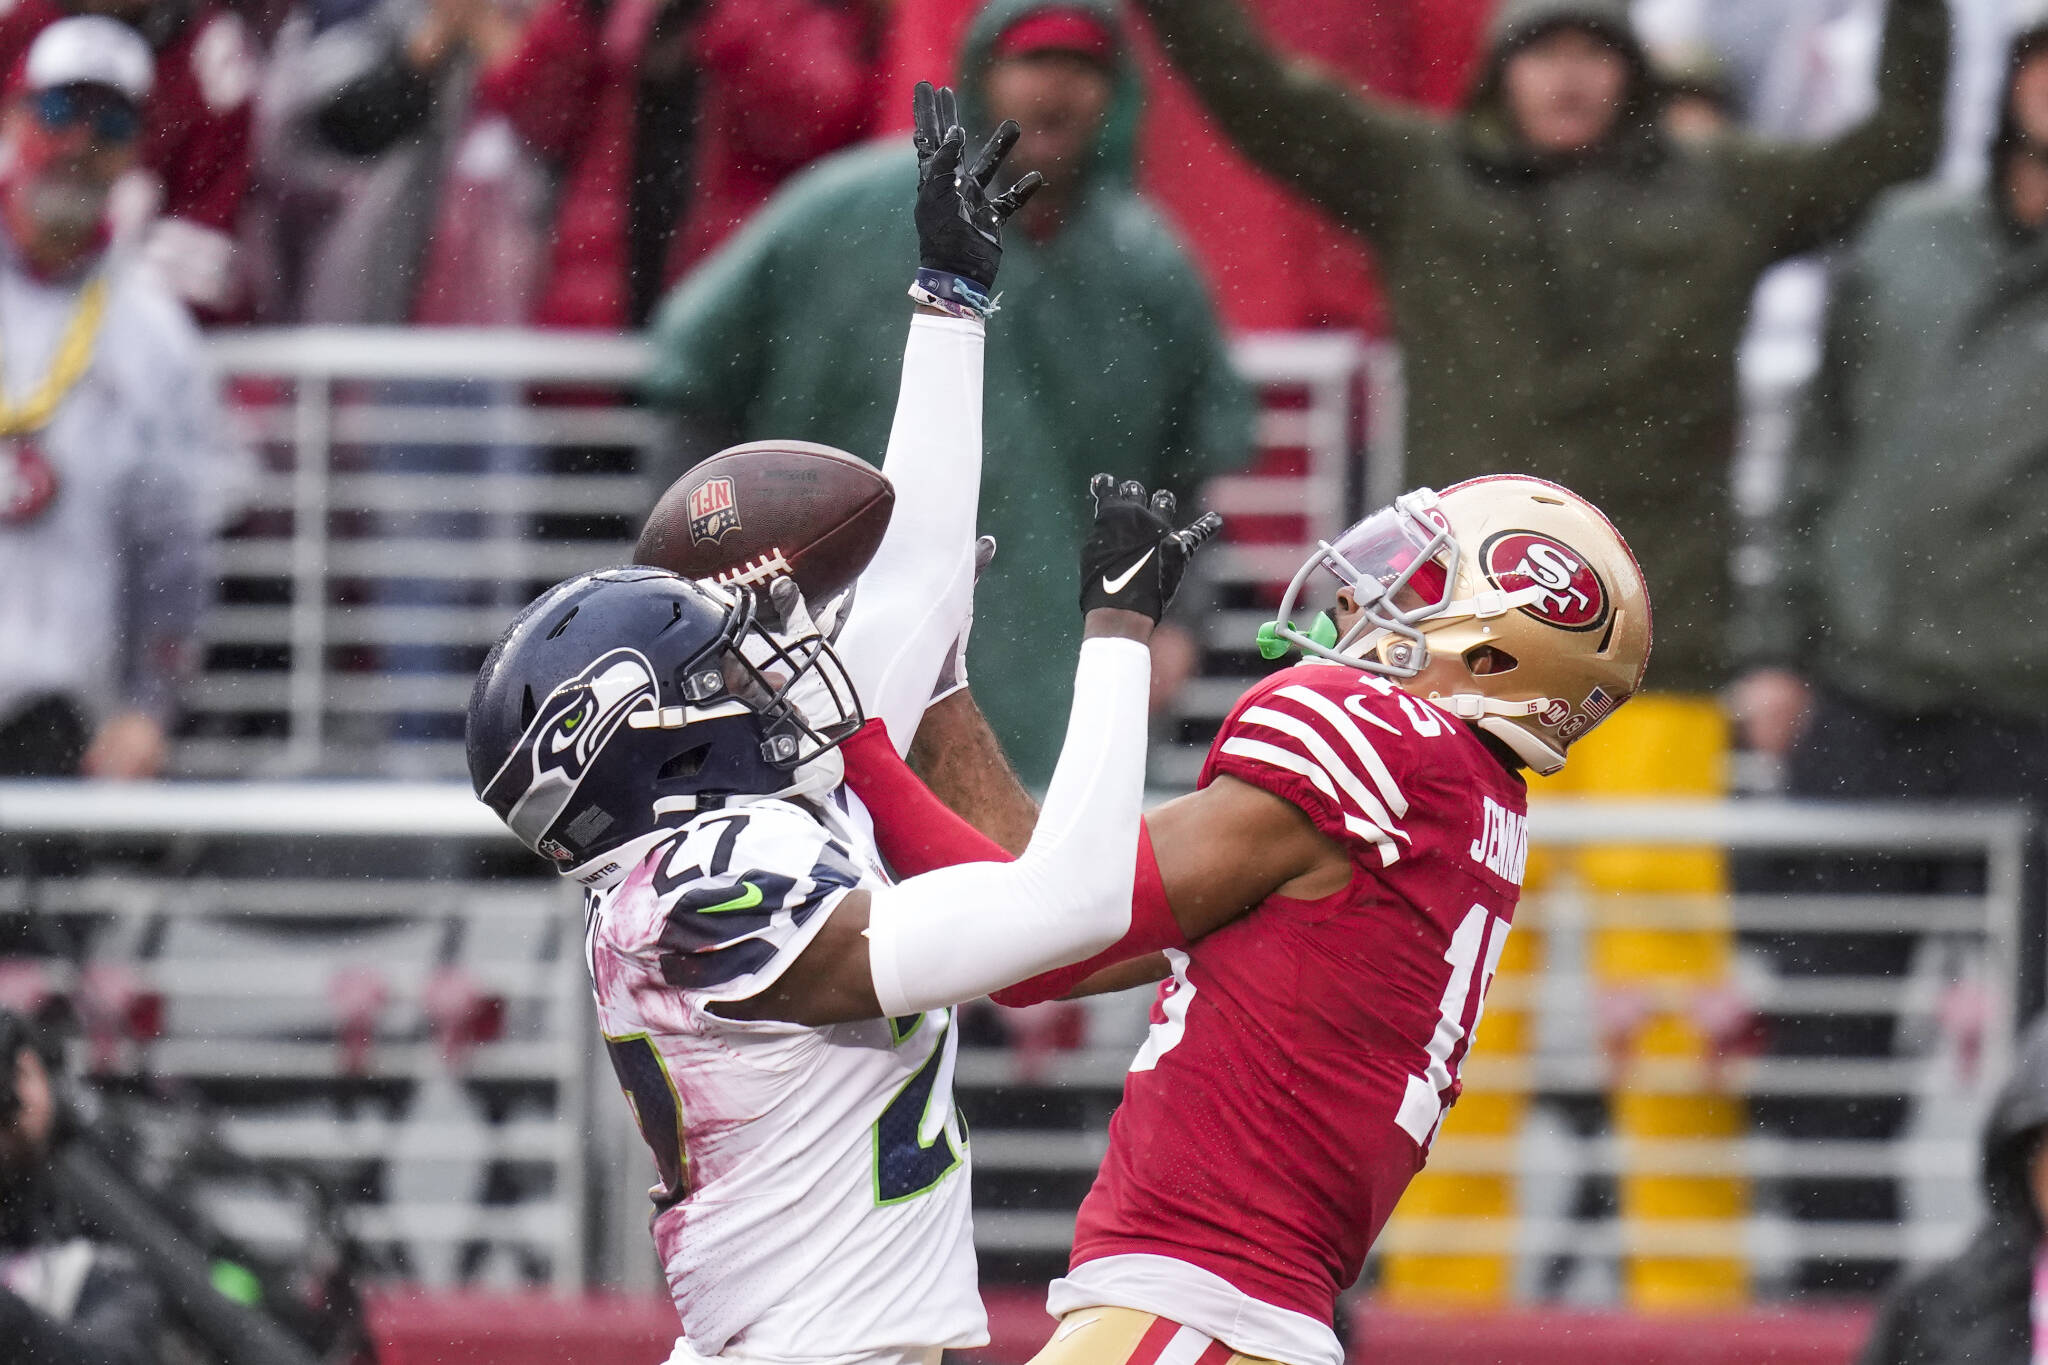 Seahawks cornerback Tariq Woolen (left) breaks up a pass intended for 49ers wide receiver Jauan Jennings during the first half of a playoff game Saturday in Santa Clara, Calif. (AP Photo/Godofredo A. Vásquez)